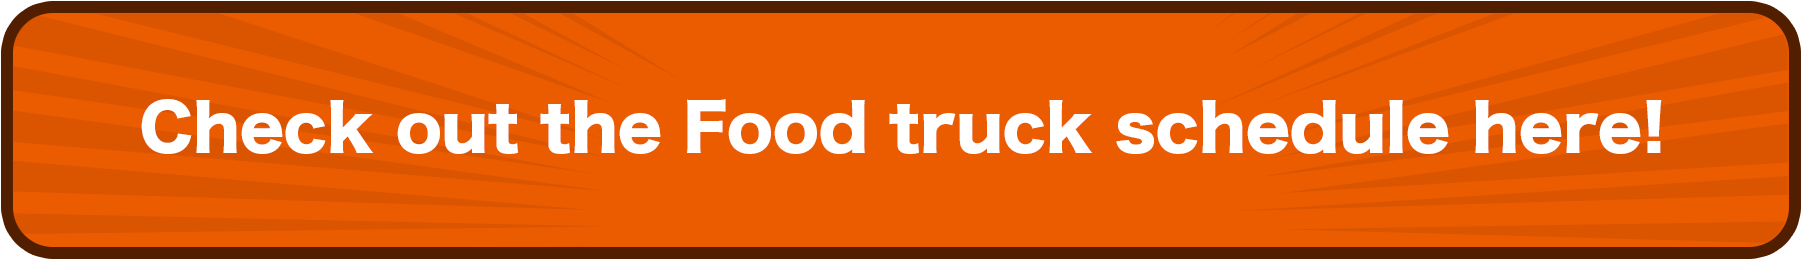 Check out the Food truck schedule here!